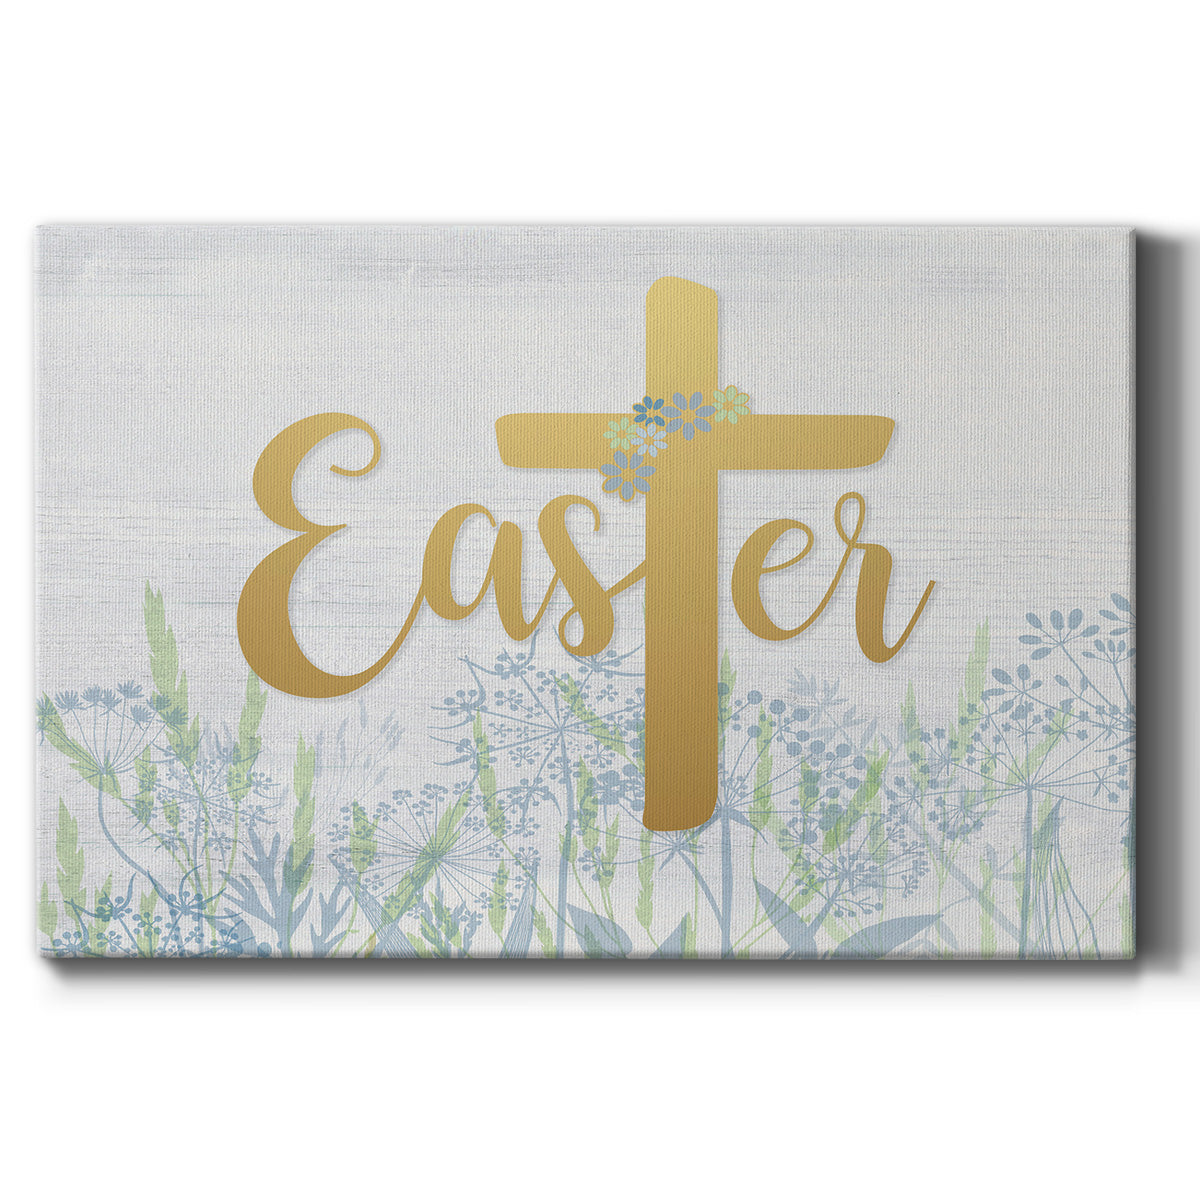 Easter Wildflowers Premium Gallery Wrapped Canvas - Ready to Hang